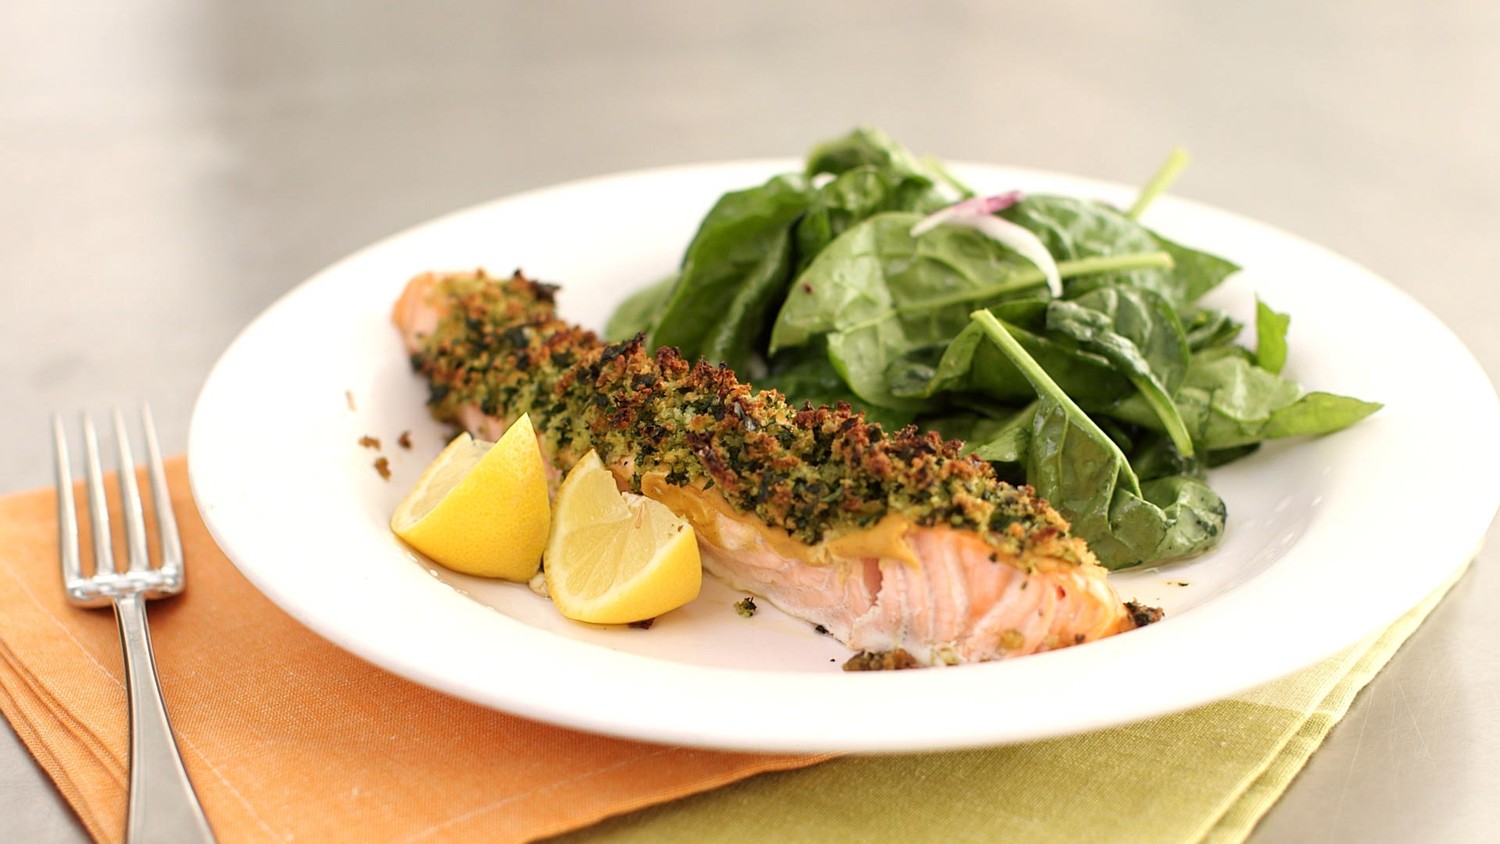 Video: Herb-Crusted Salmon with Spinach Salad | Martha Stewart